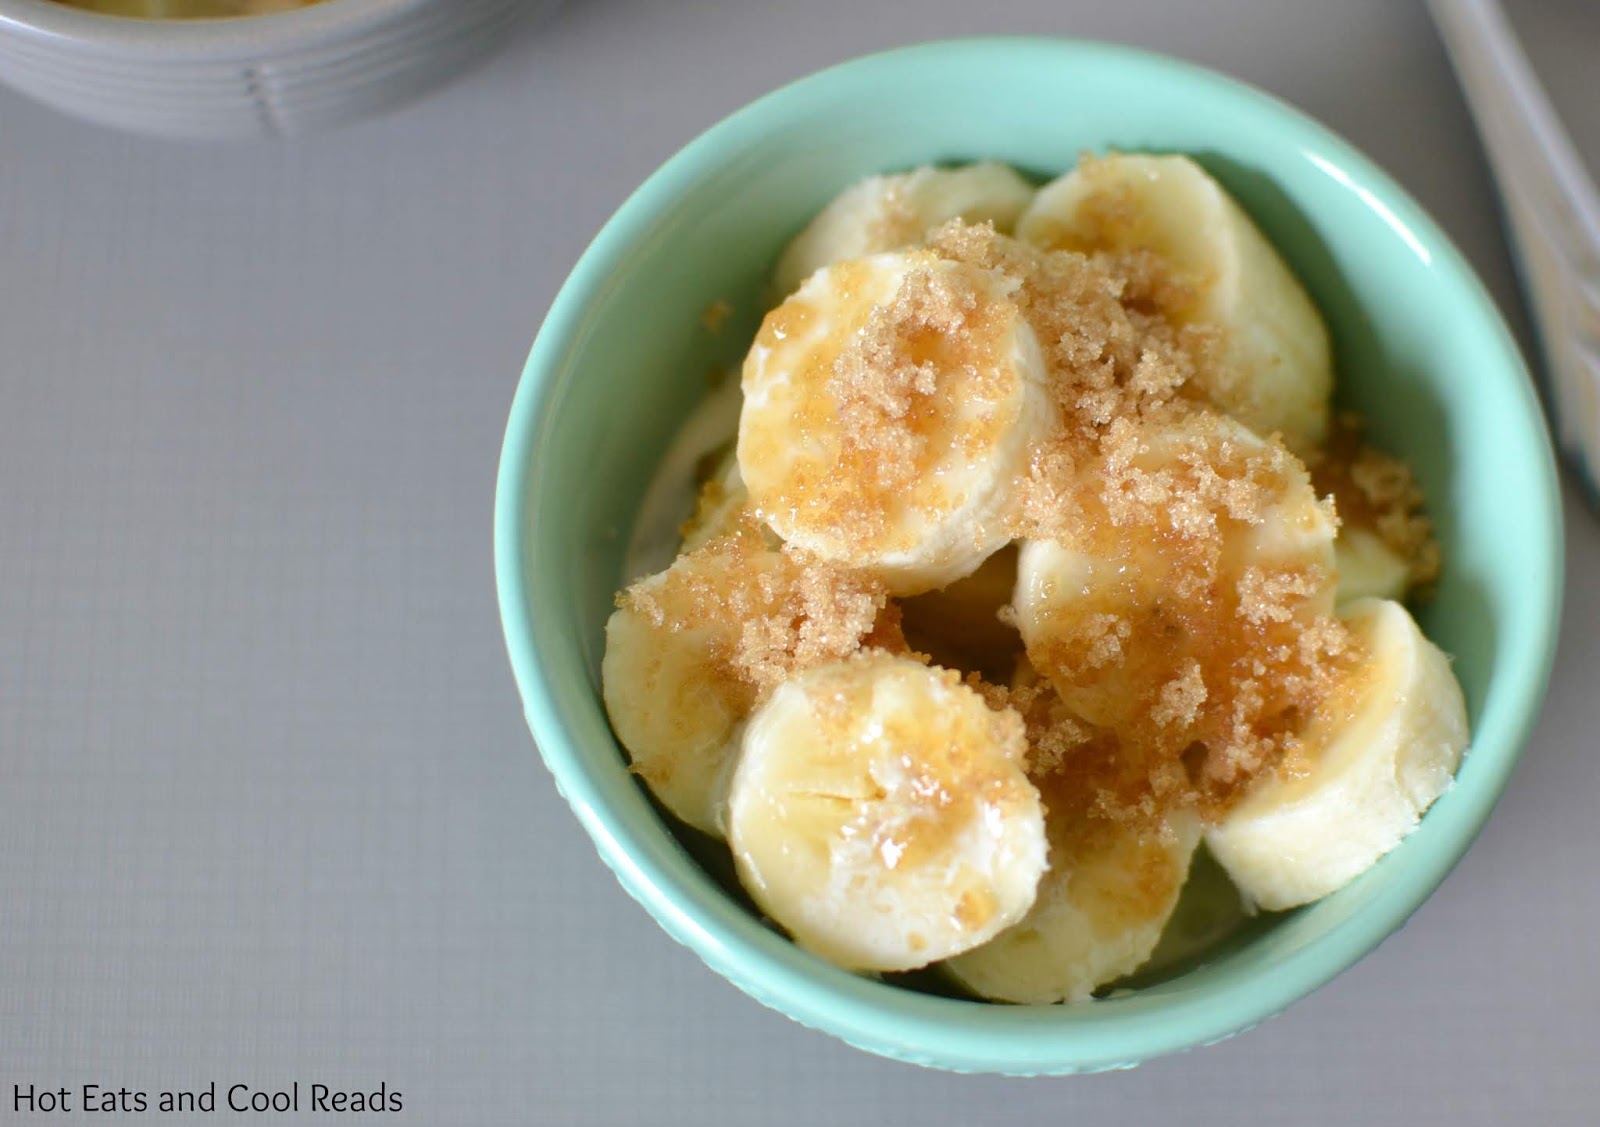 Brown Sugar Bananas and Cream Recipe from Hot Eats and Cool Reads! This sweet treat is ready in minutes and is great for breakfast or as a dessert!